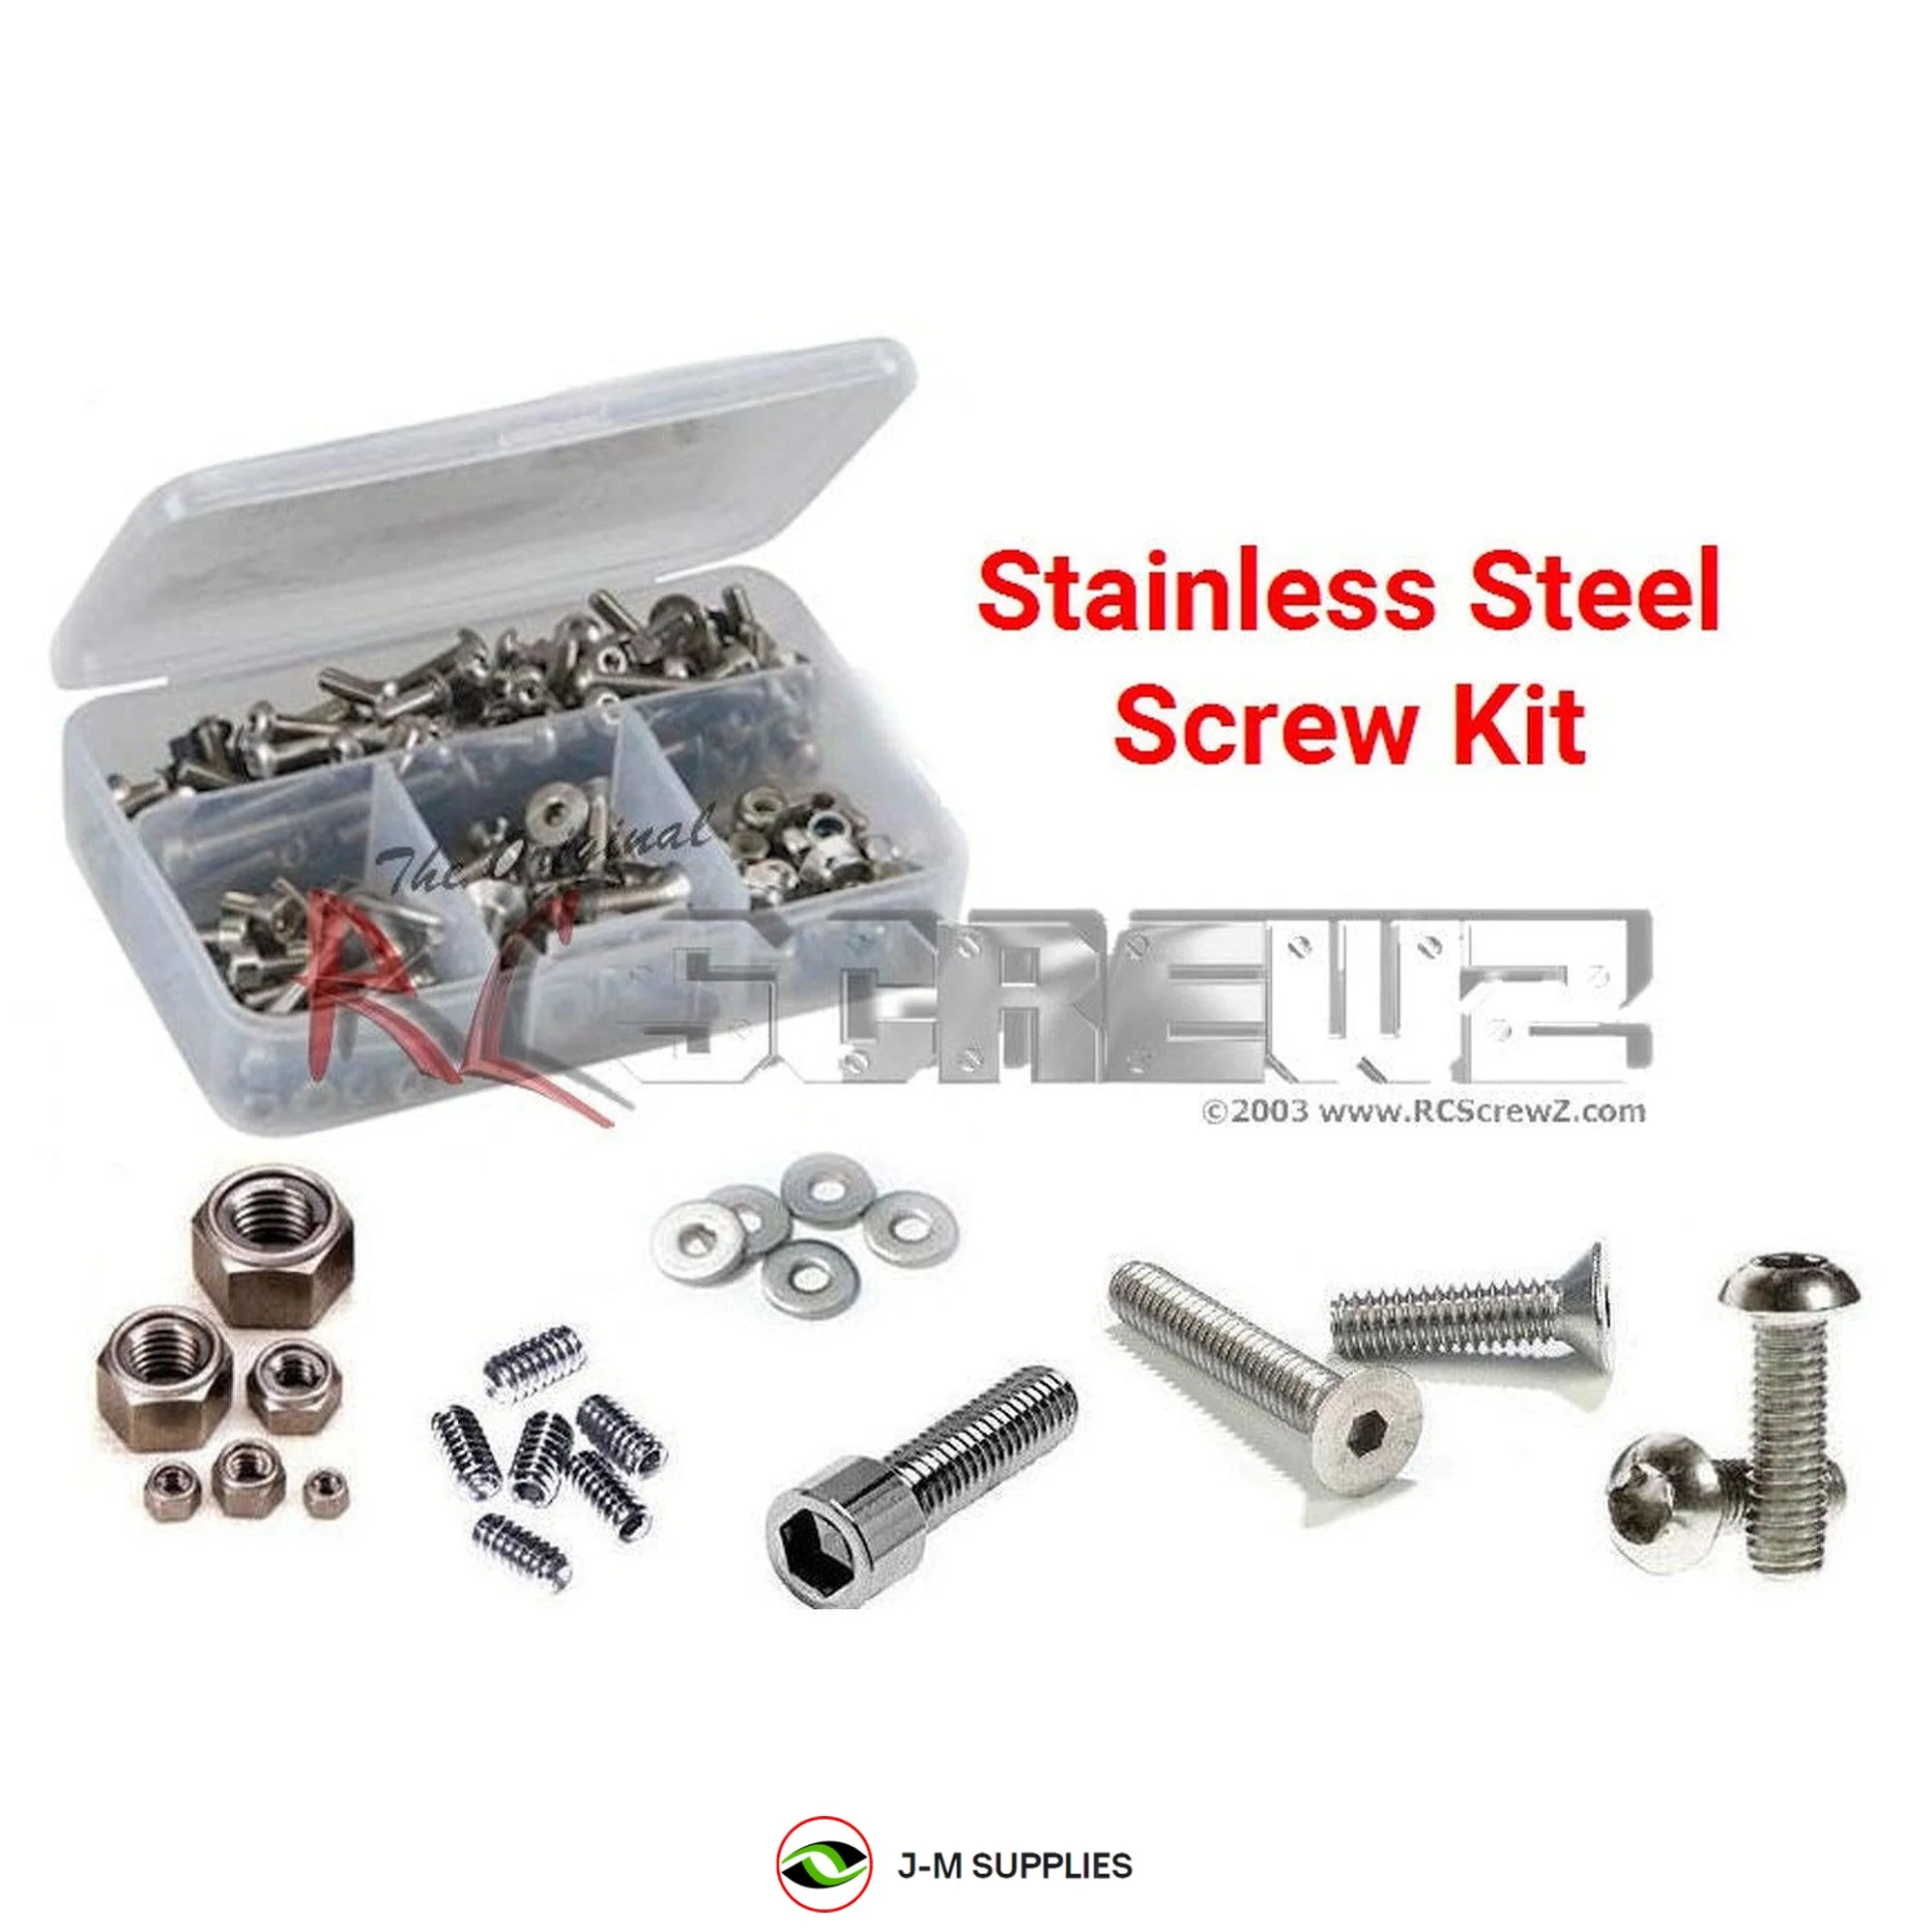 RCScrewZ Stainless Steel Screw Kit dur035 for Duratrax Nissan GT-R - Picture 1 of 12